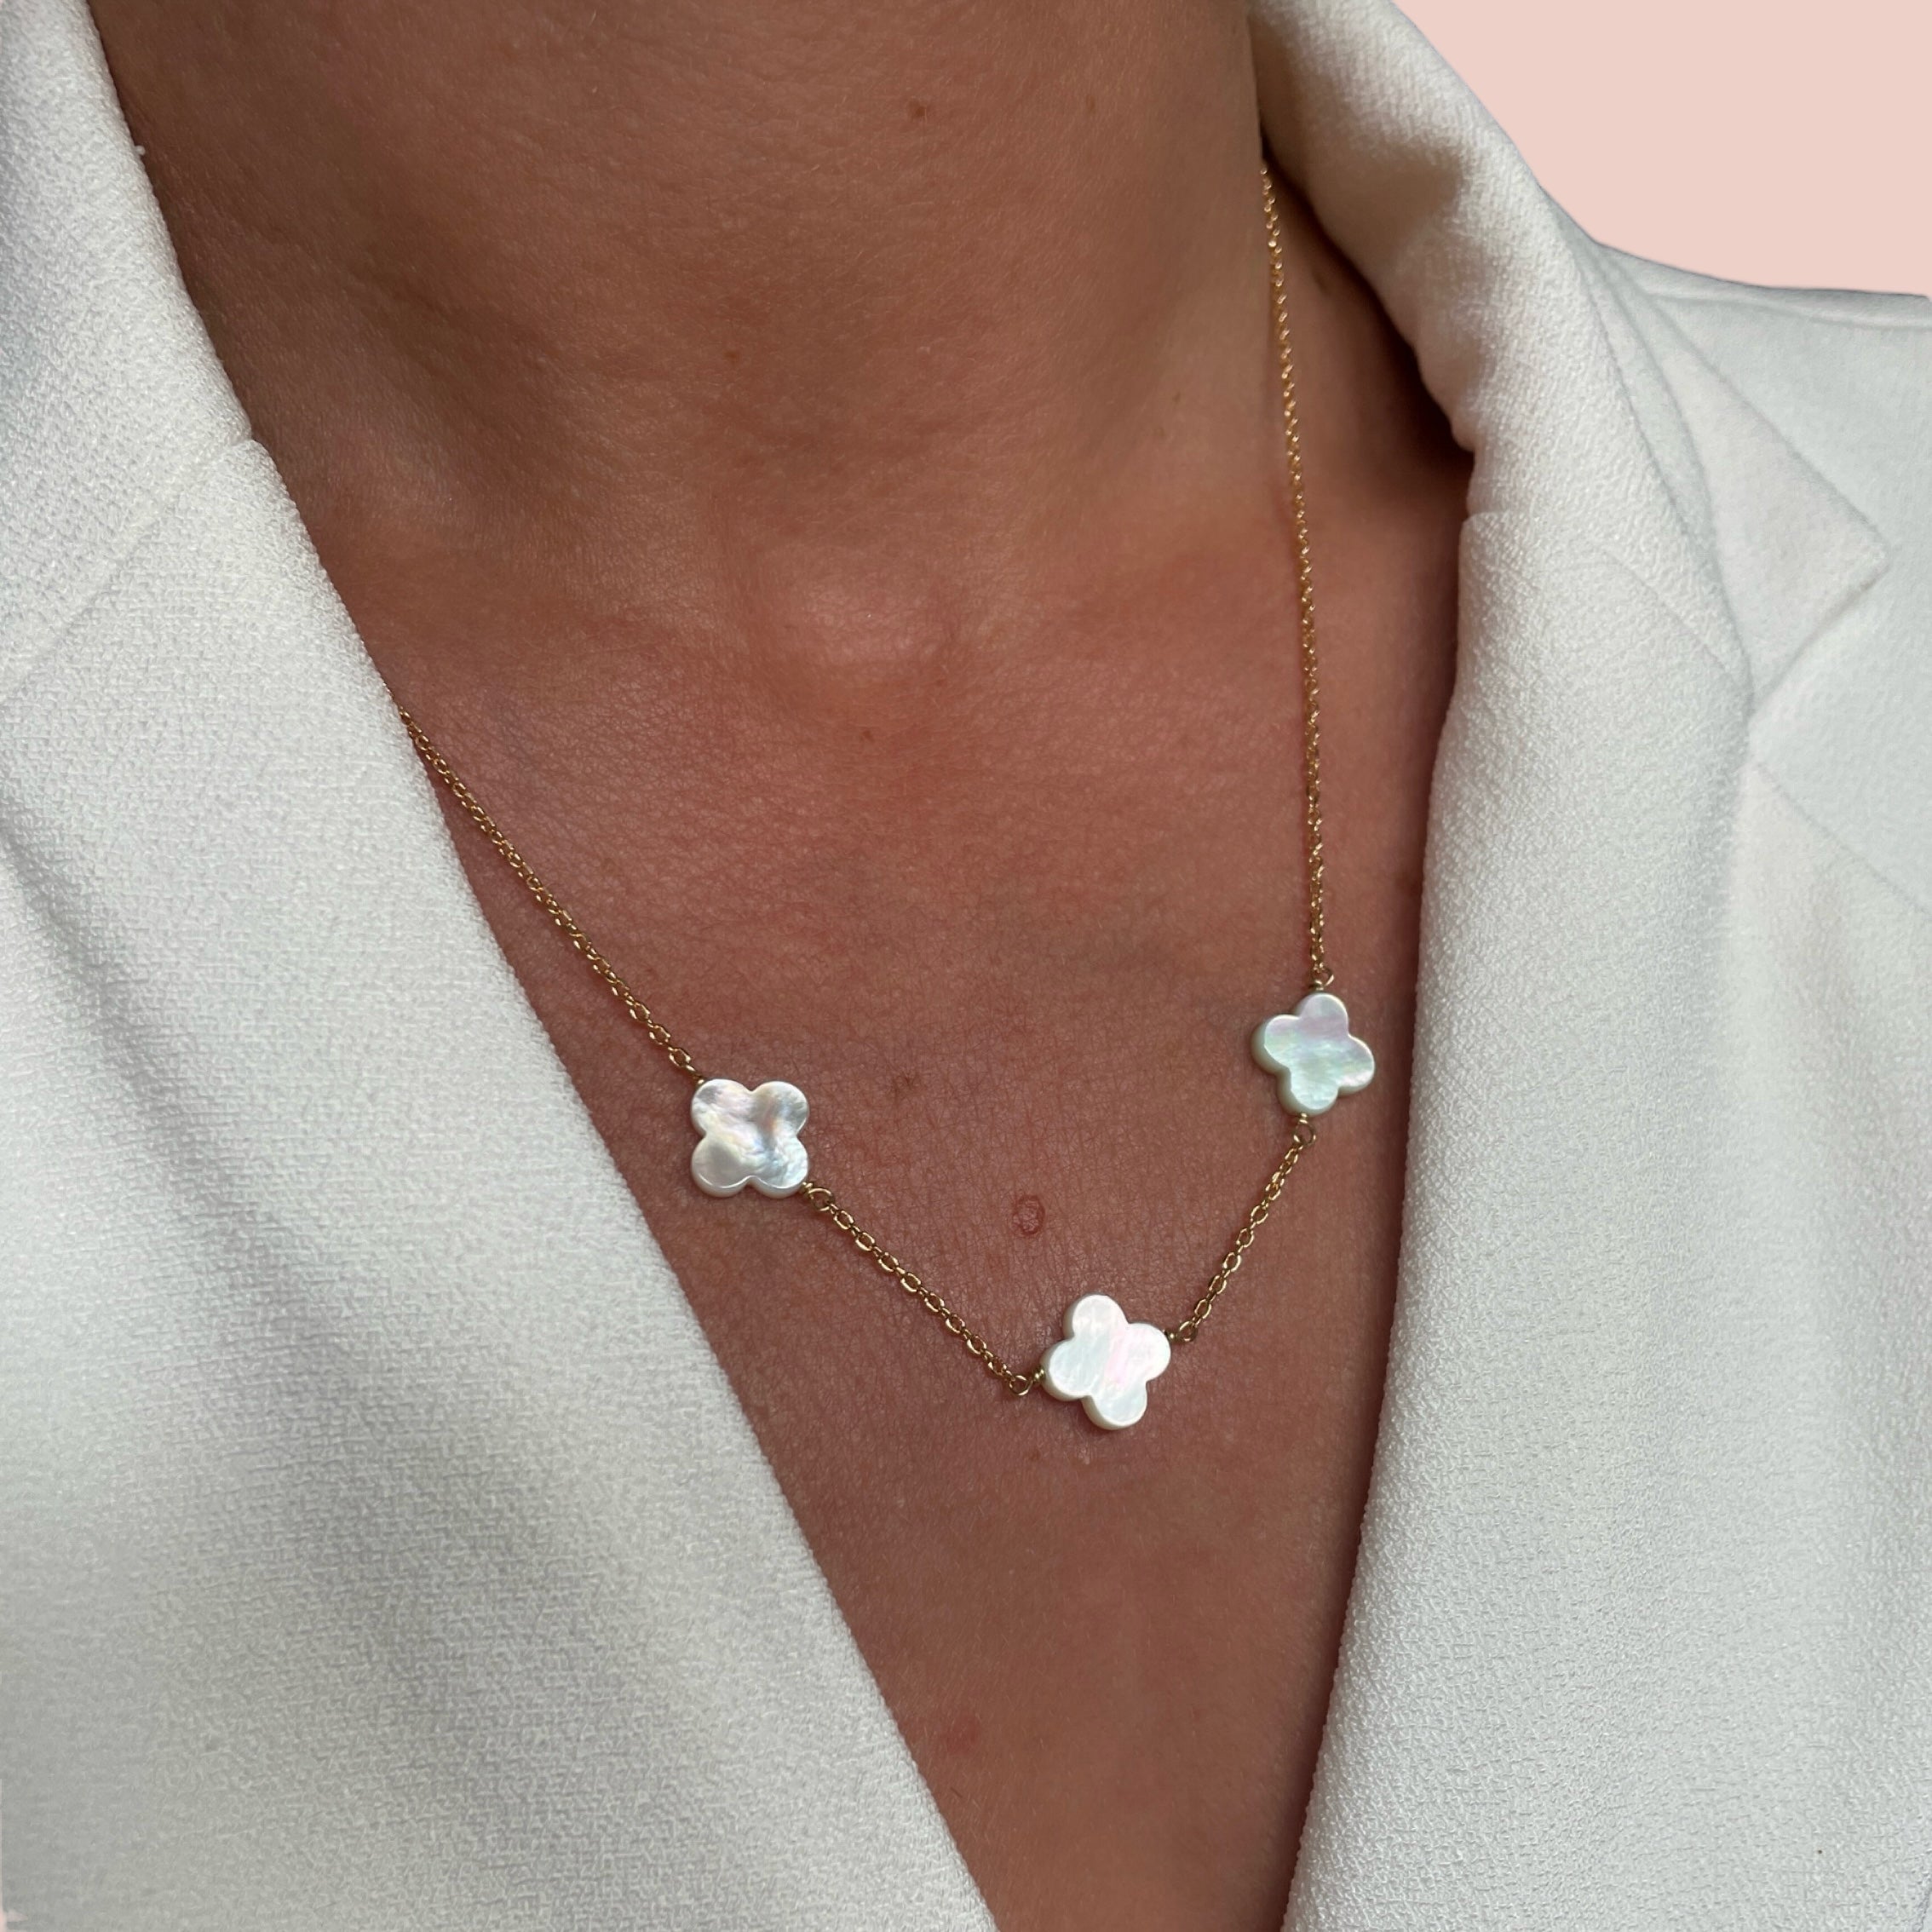 Gold-plated “White mother-of-pearl clovers” necklace